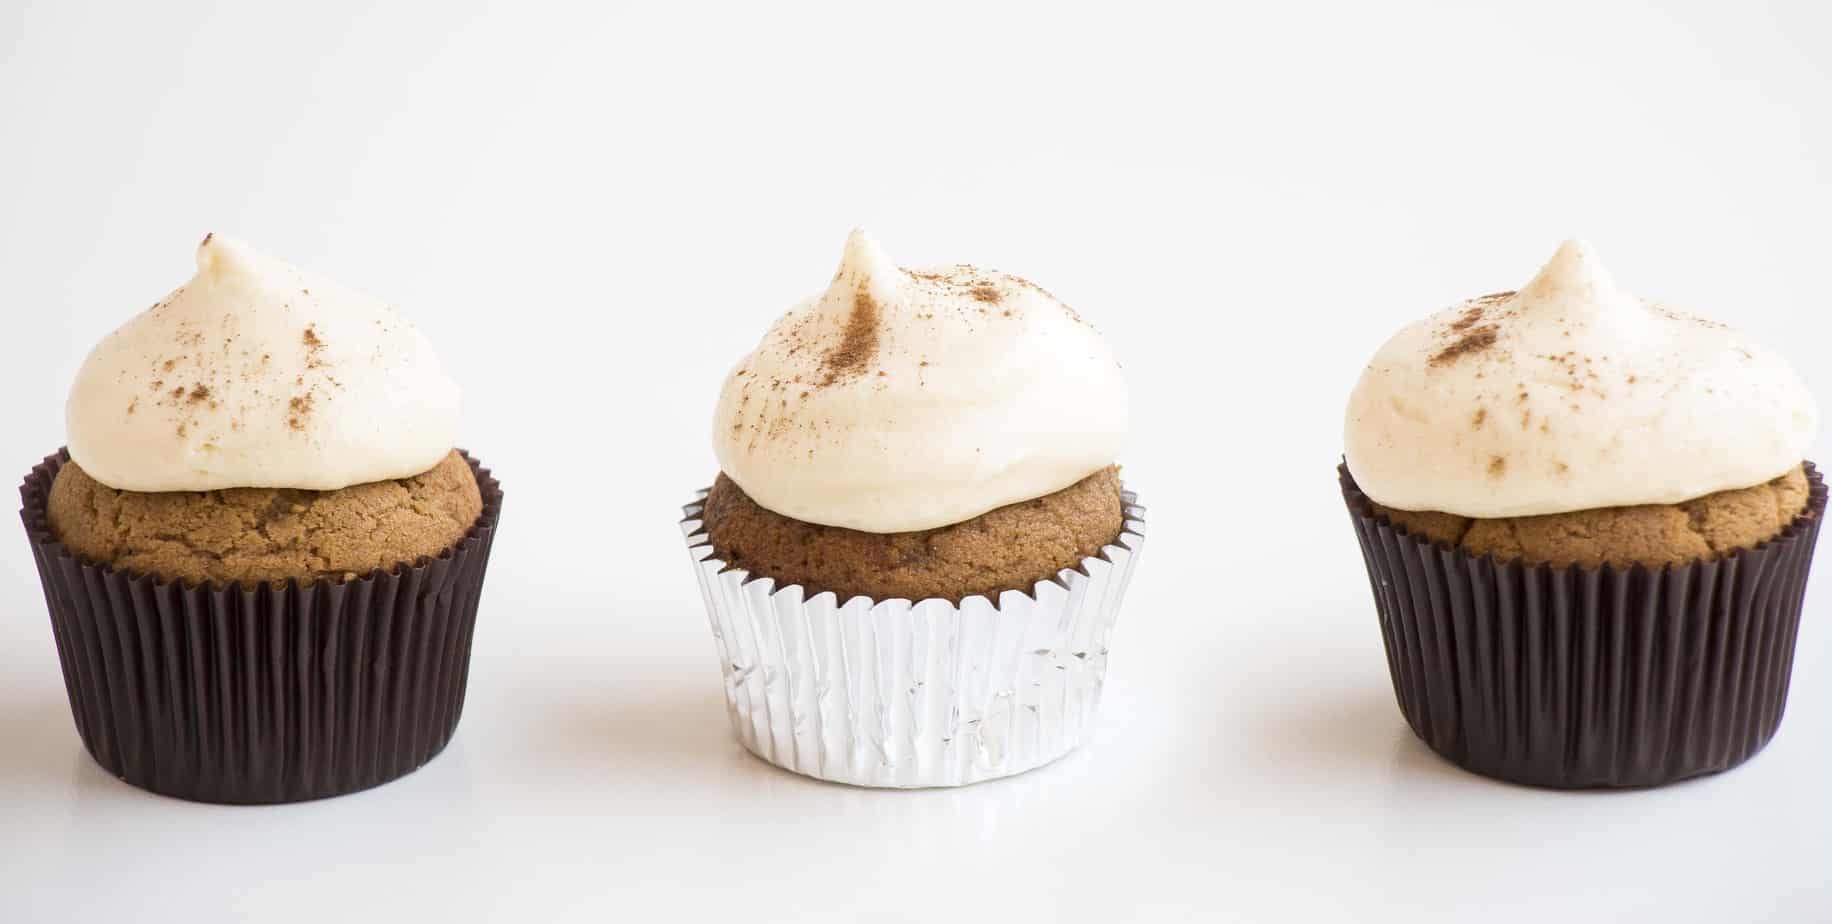 Three Vegan Gingerbread Cupcakes with Cream Cheese Frosting